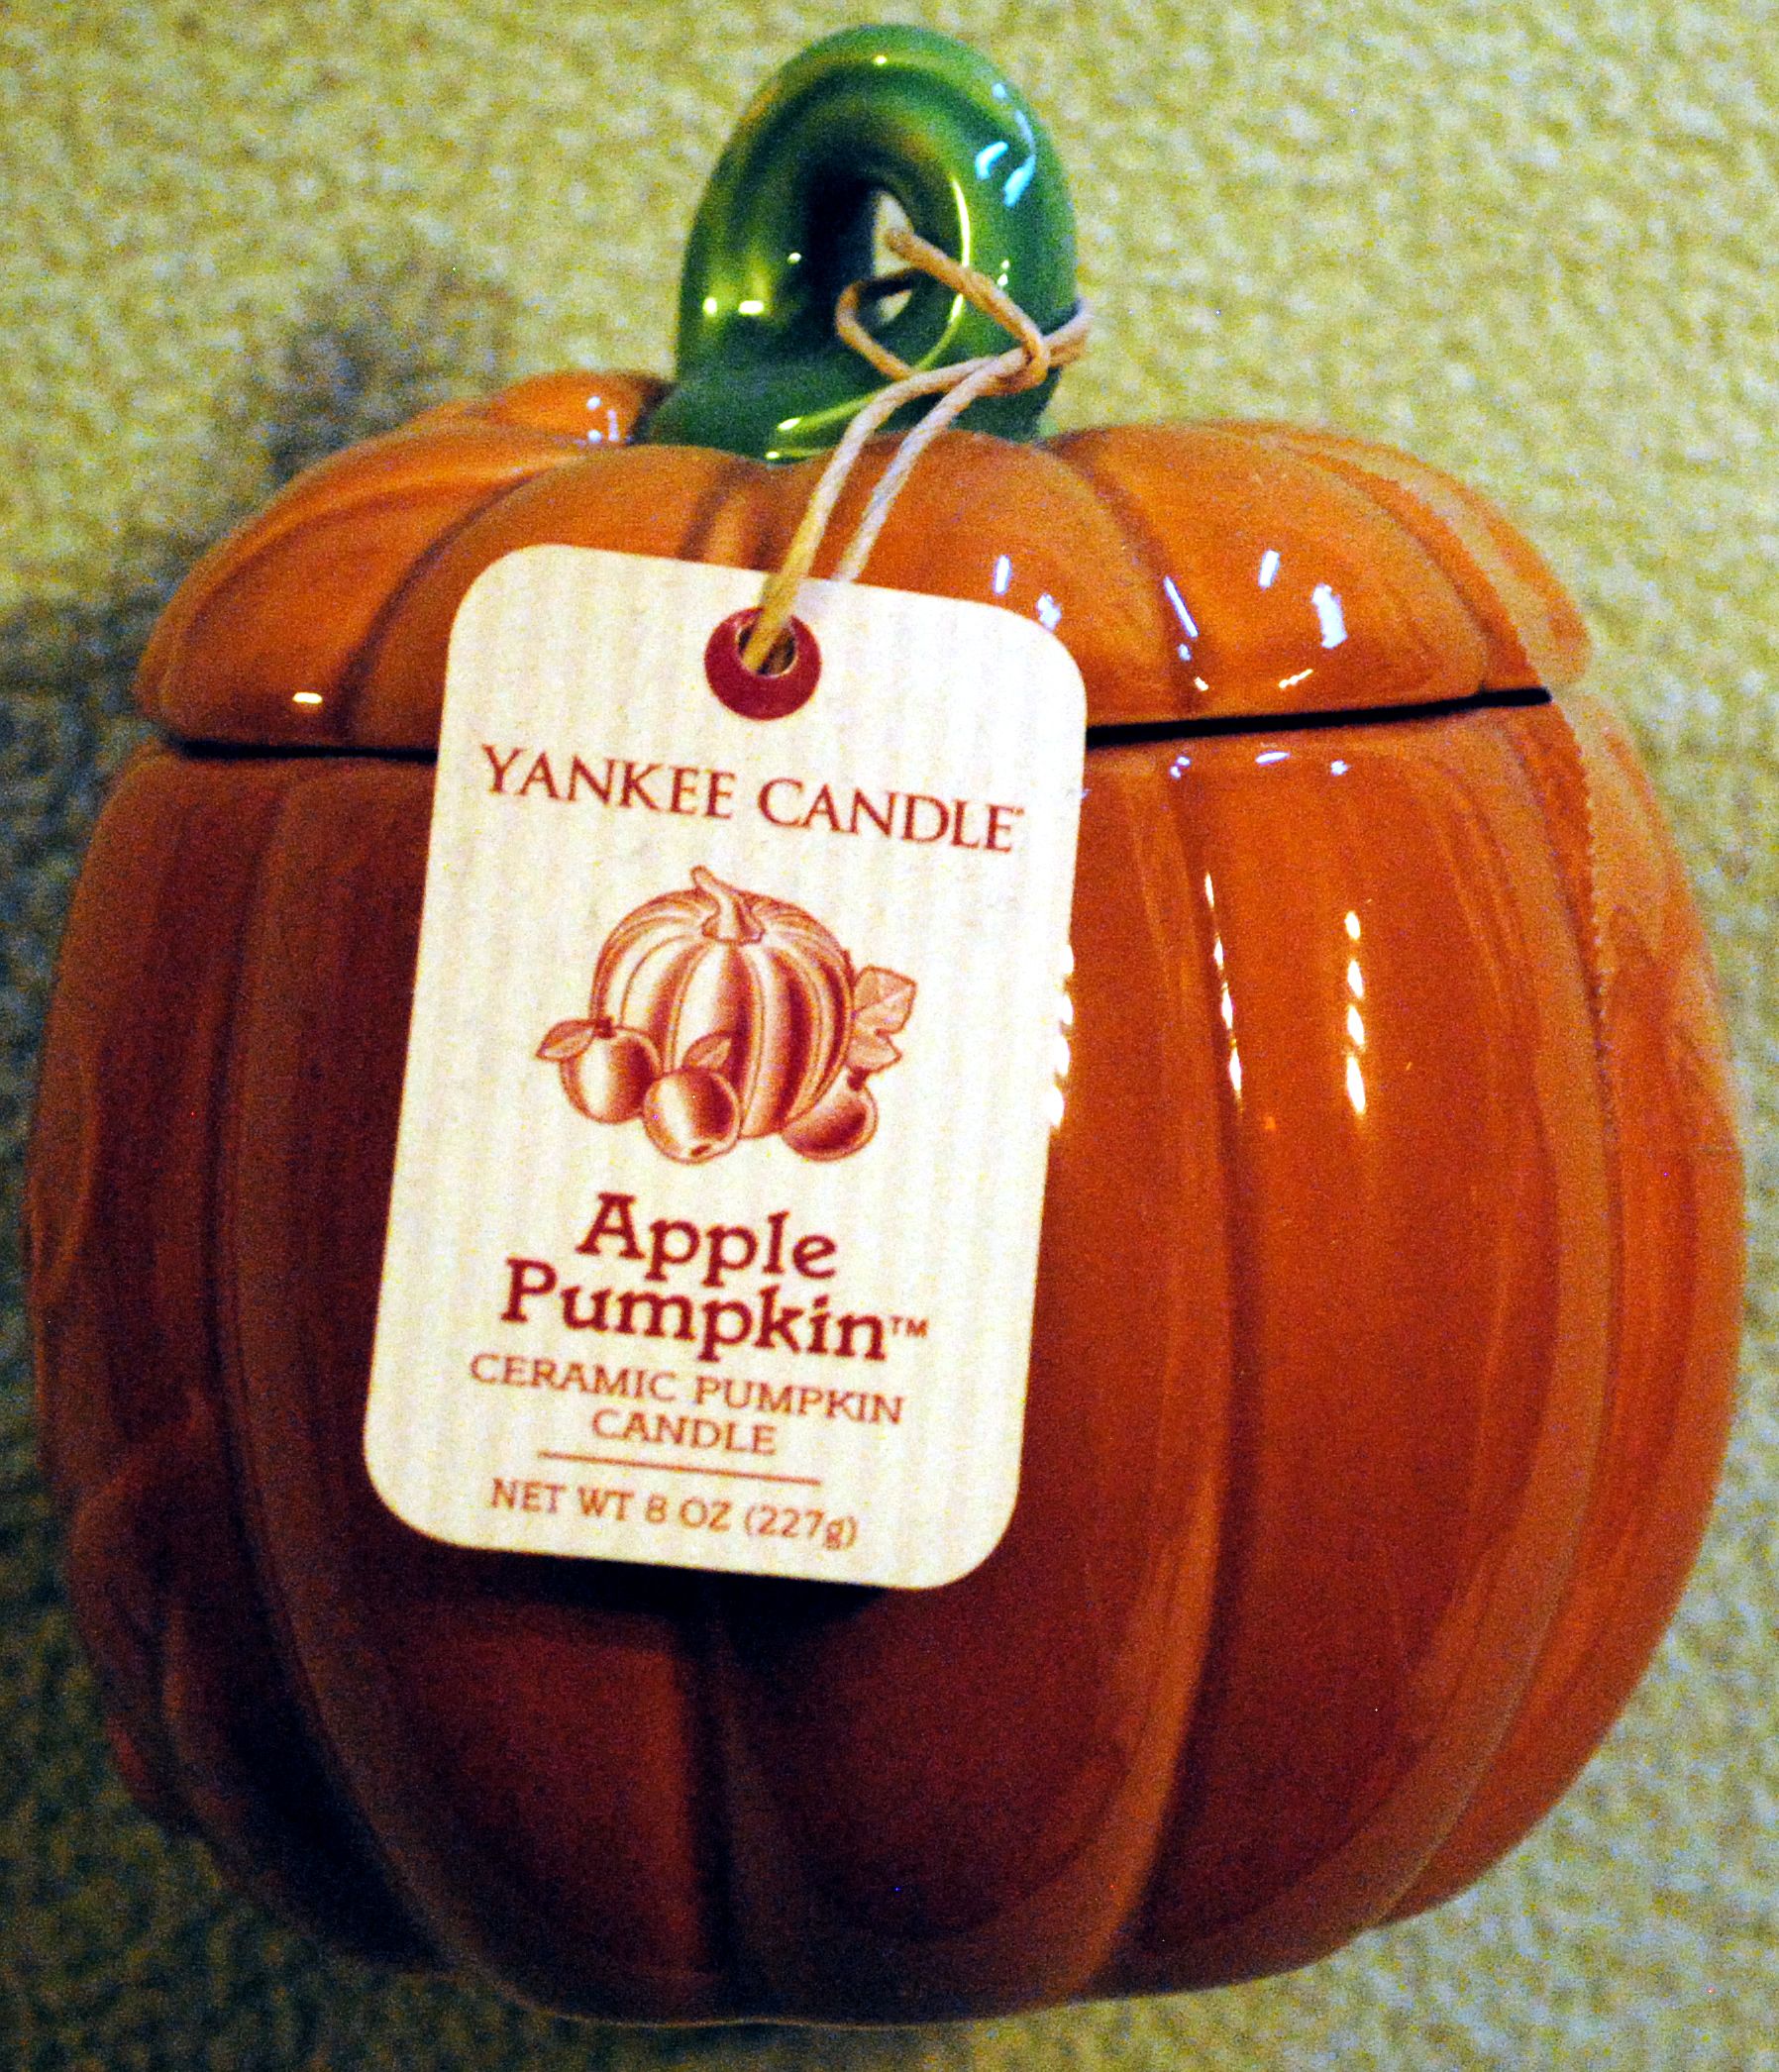 CANDLE: Pumpkins Yankee Ceramic Apple Pumpkin 2014 - Yankee Candle (Autumn Candles) action figure collectible - Main Image 1